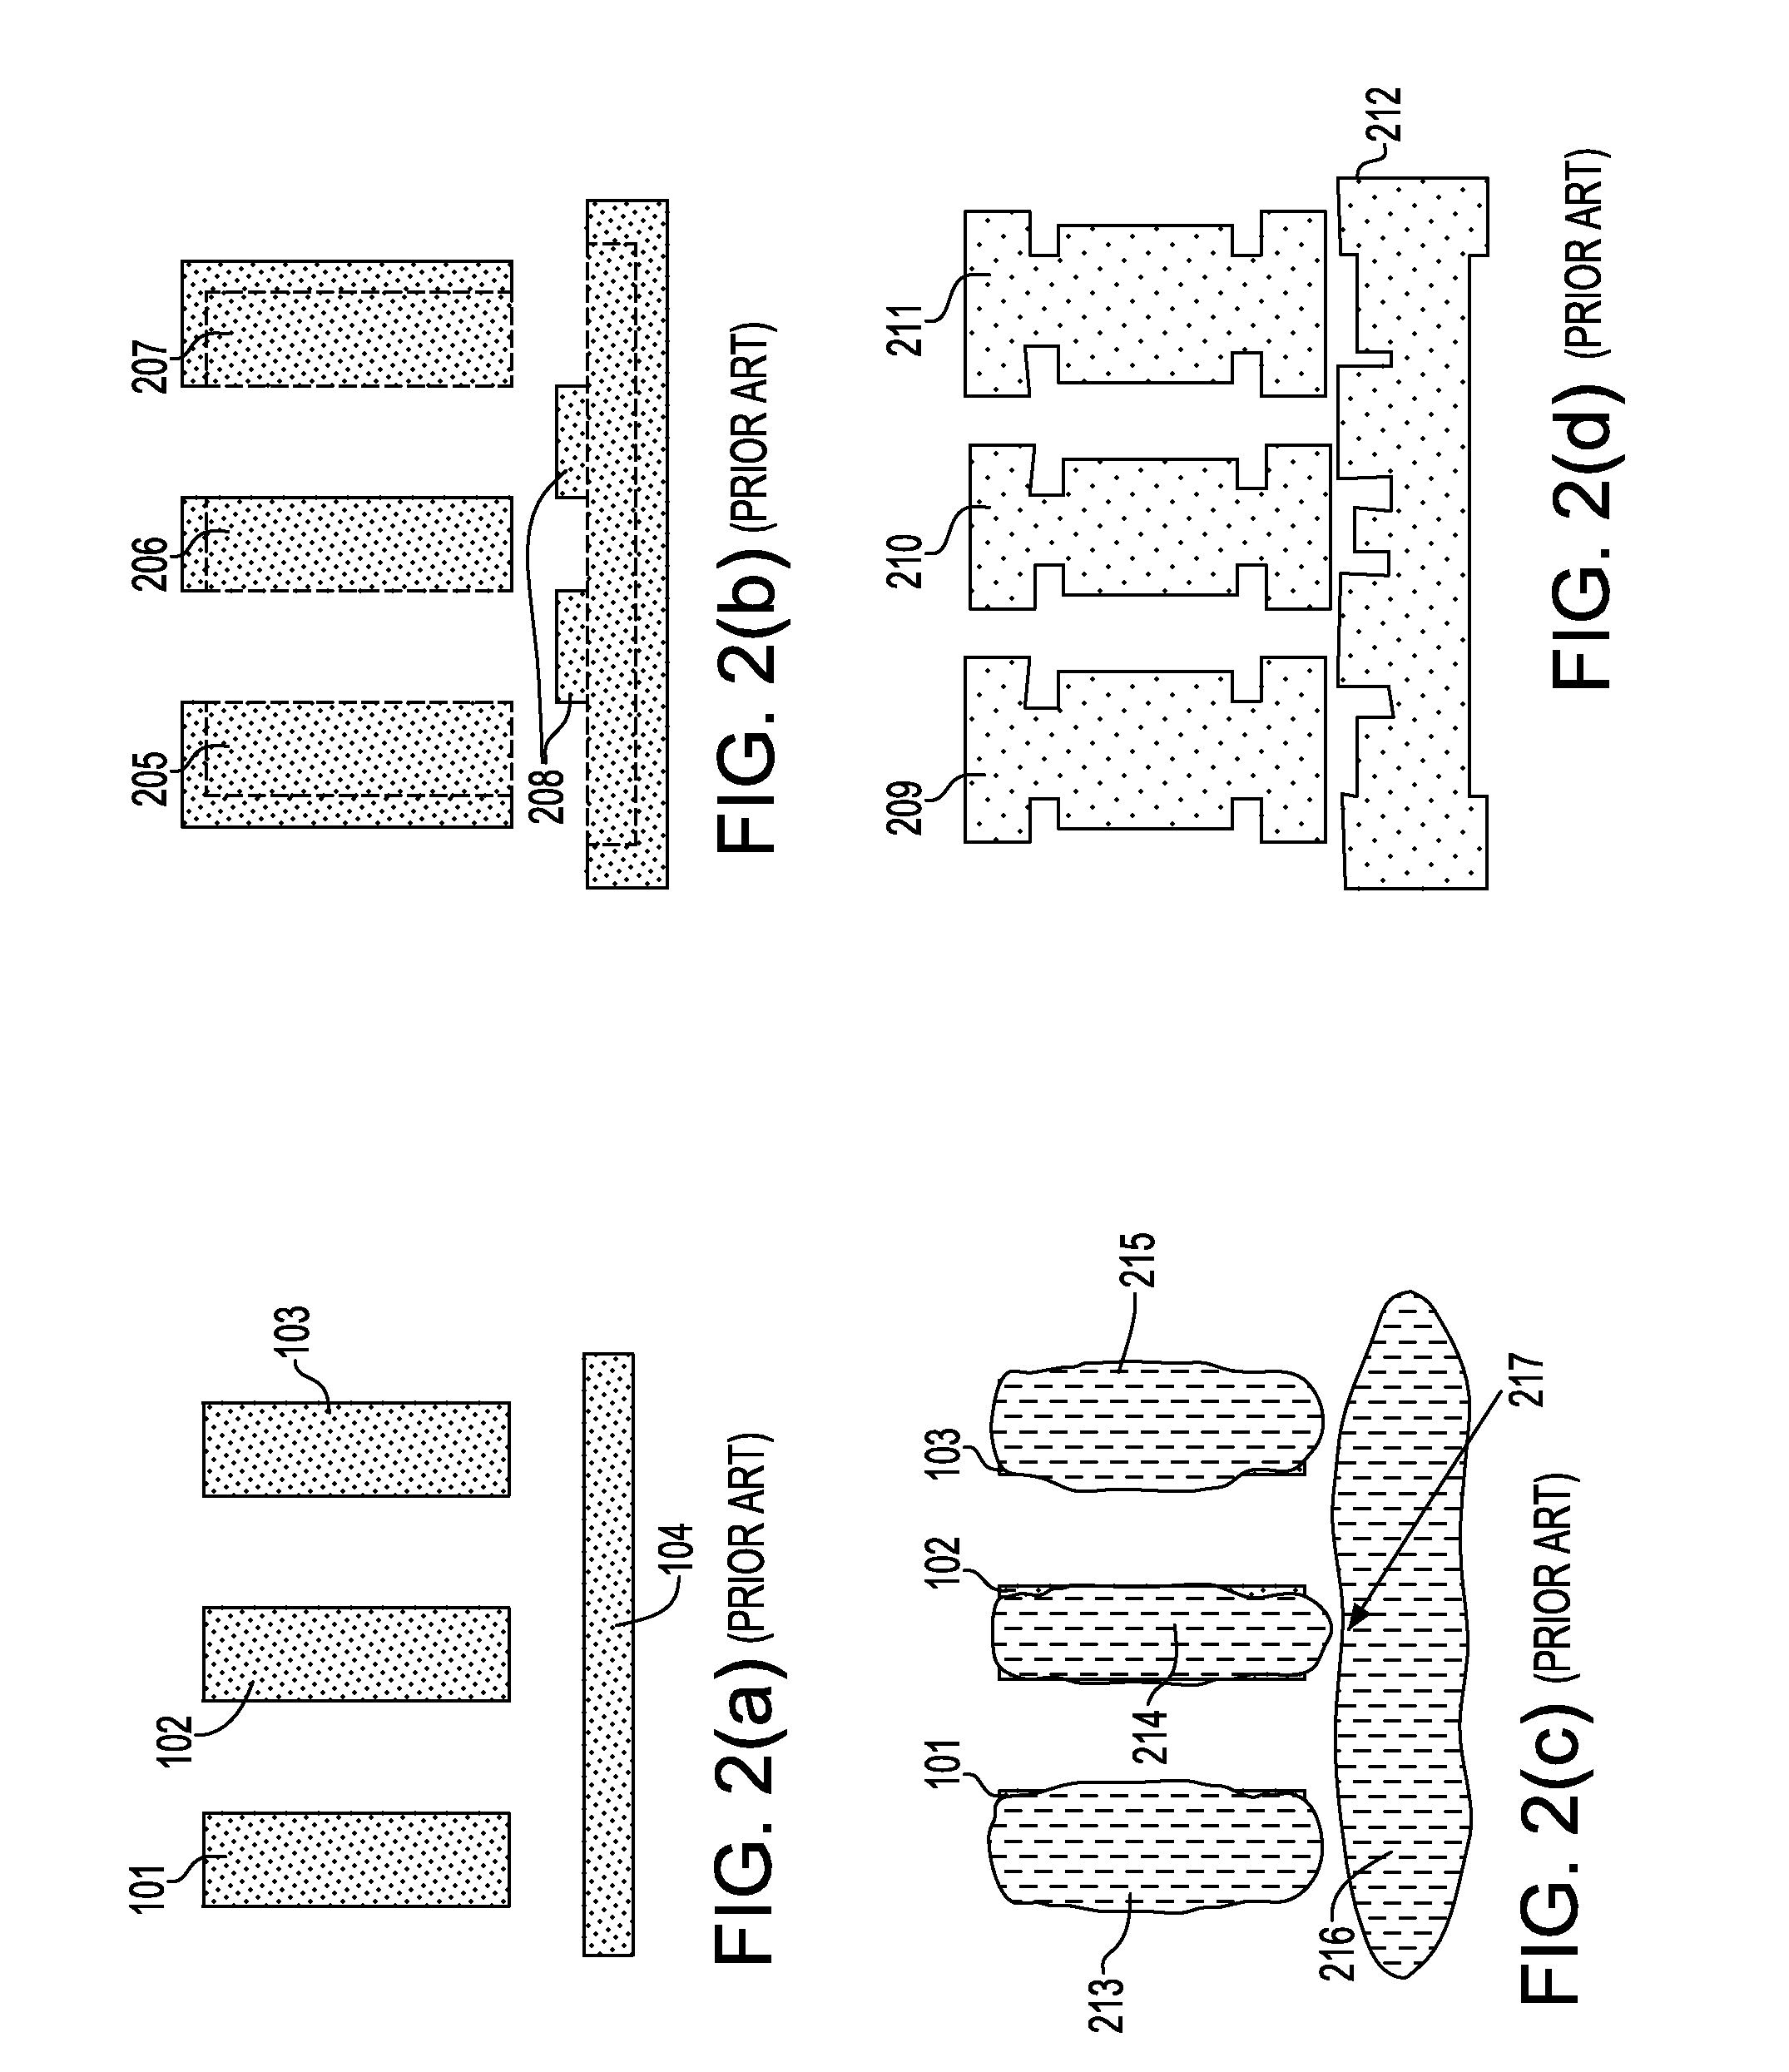 Decomposition with multiple exposures in a process window based opc flow using tolerance bands